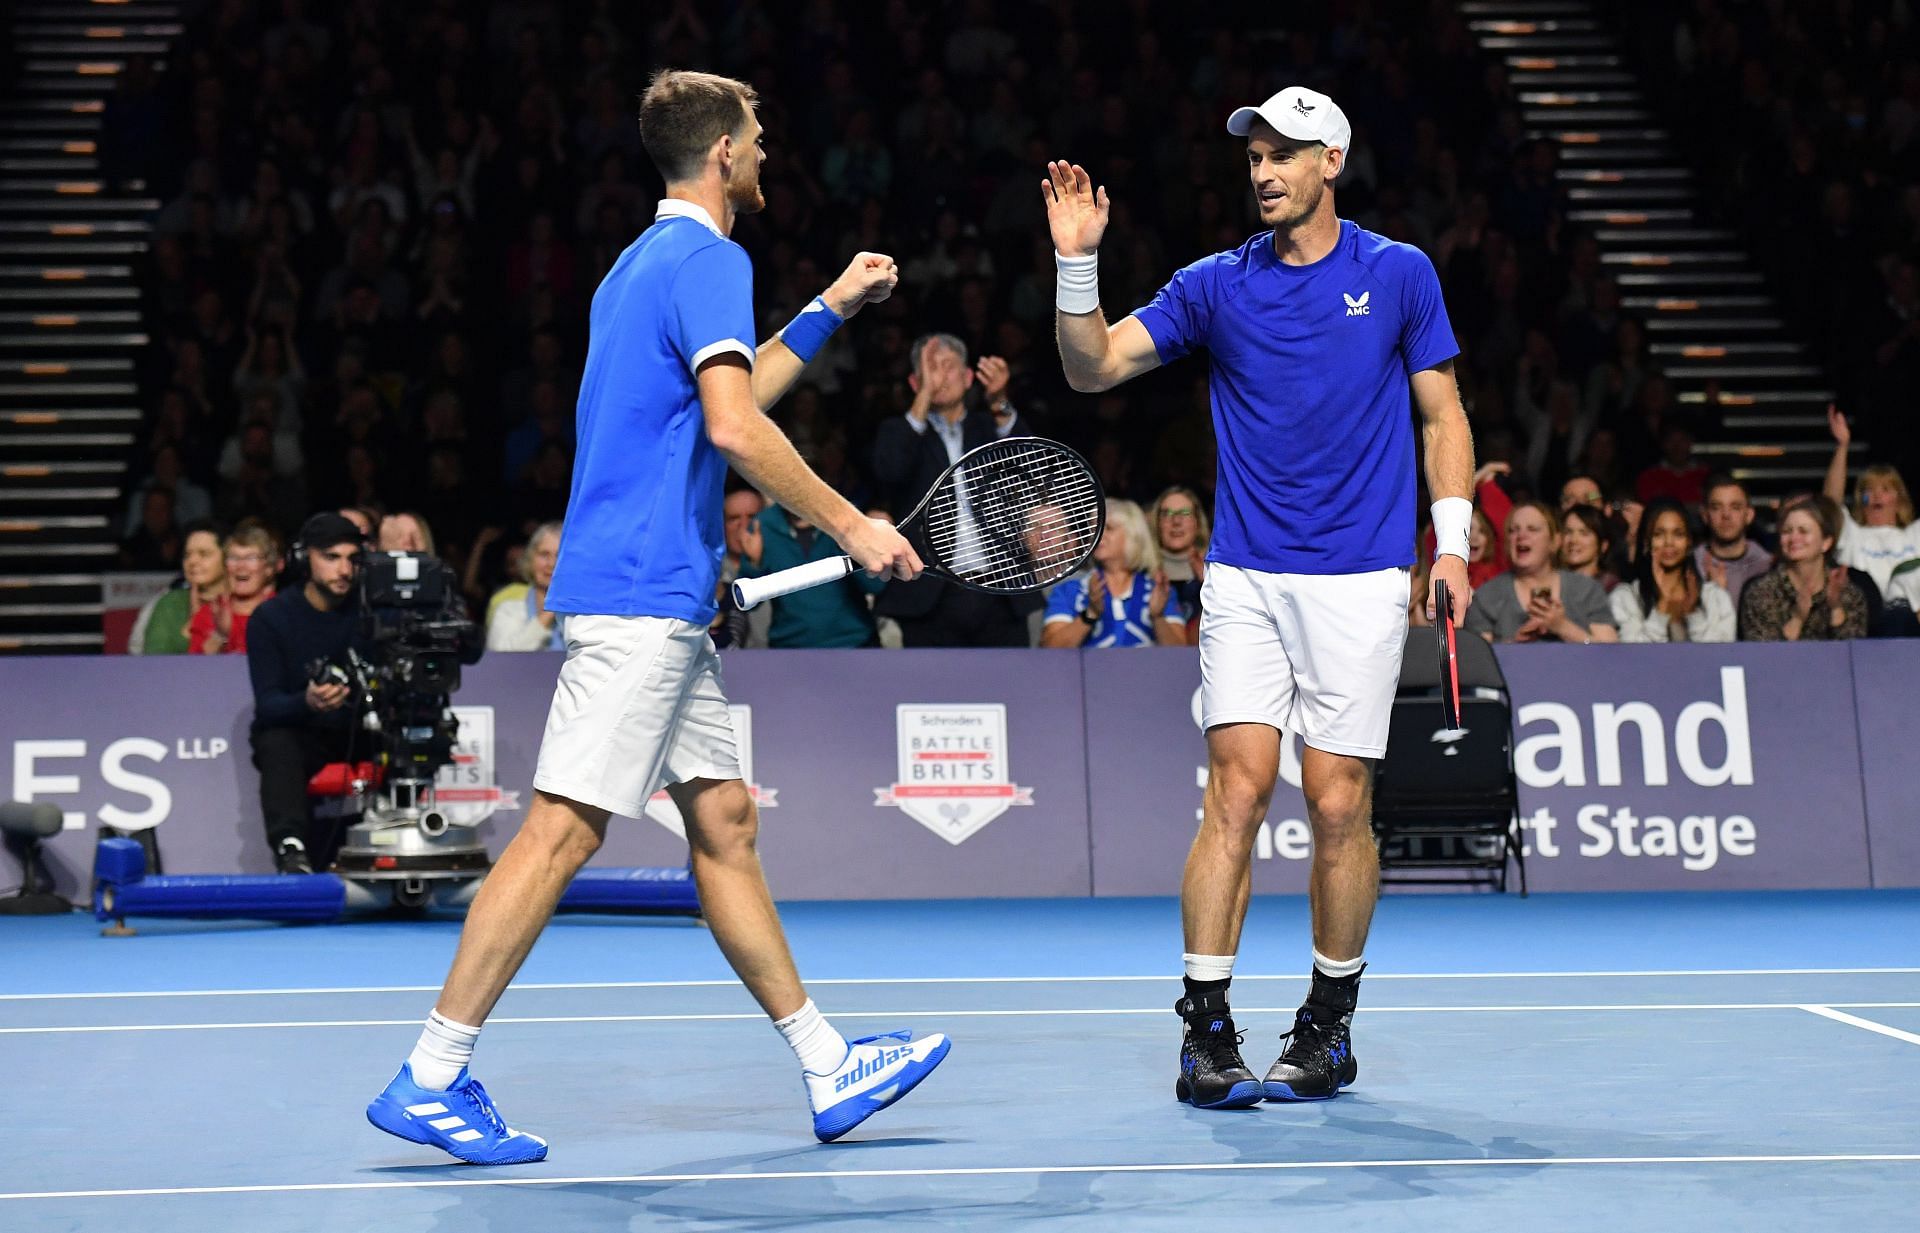 Andy Murray and Jamie Murray during their doubles match at Battle of the Brits.